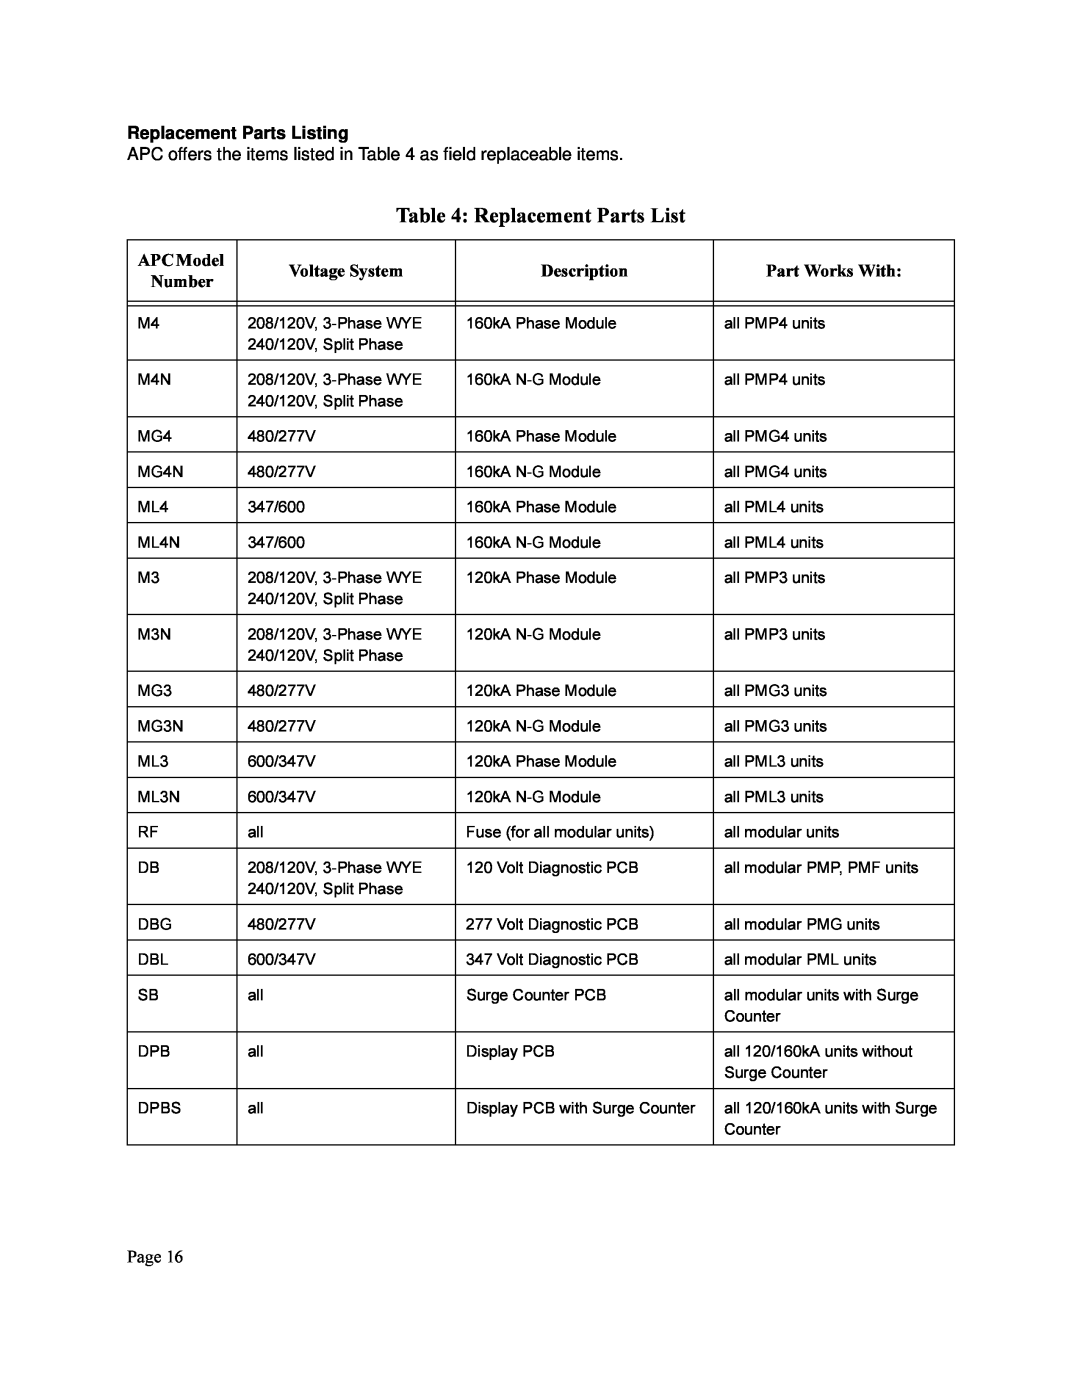 APC PM4 7DEOH5HSODFHPHQW3DUWV/LVW, Replacement Parts Listing, APC offers the items listed in as field replaceable items 